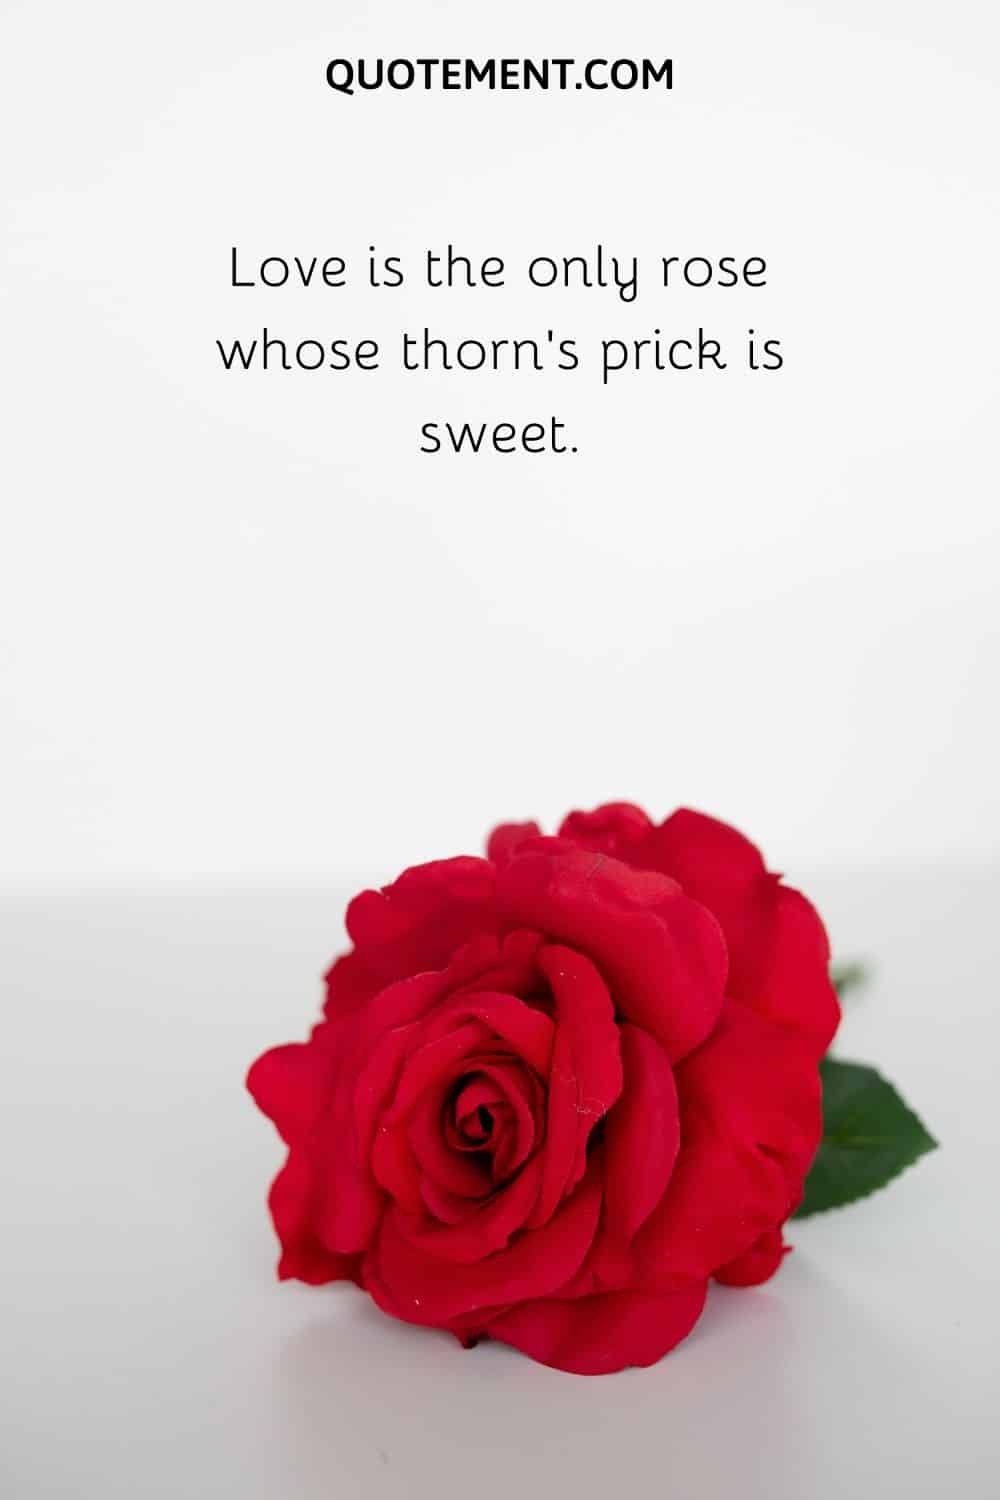 Love is the only rose whose thorn’s prick is sweet.